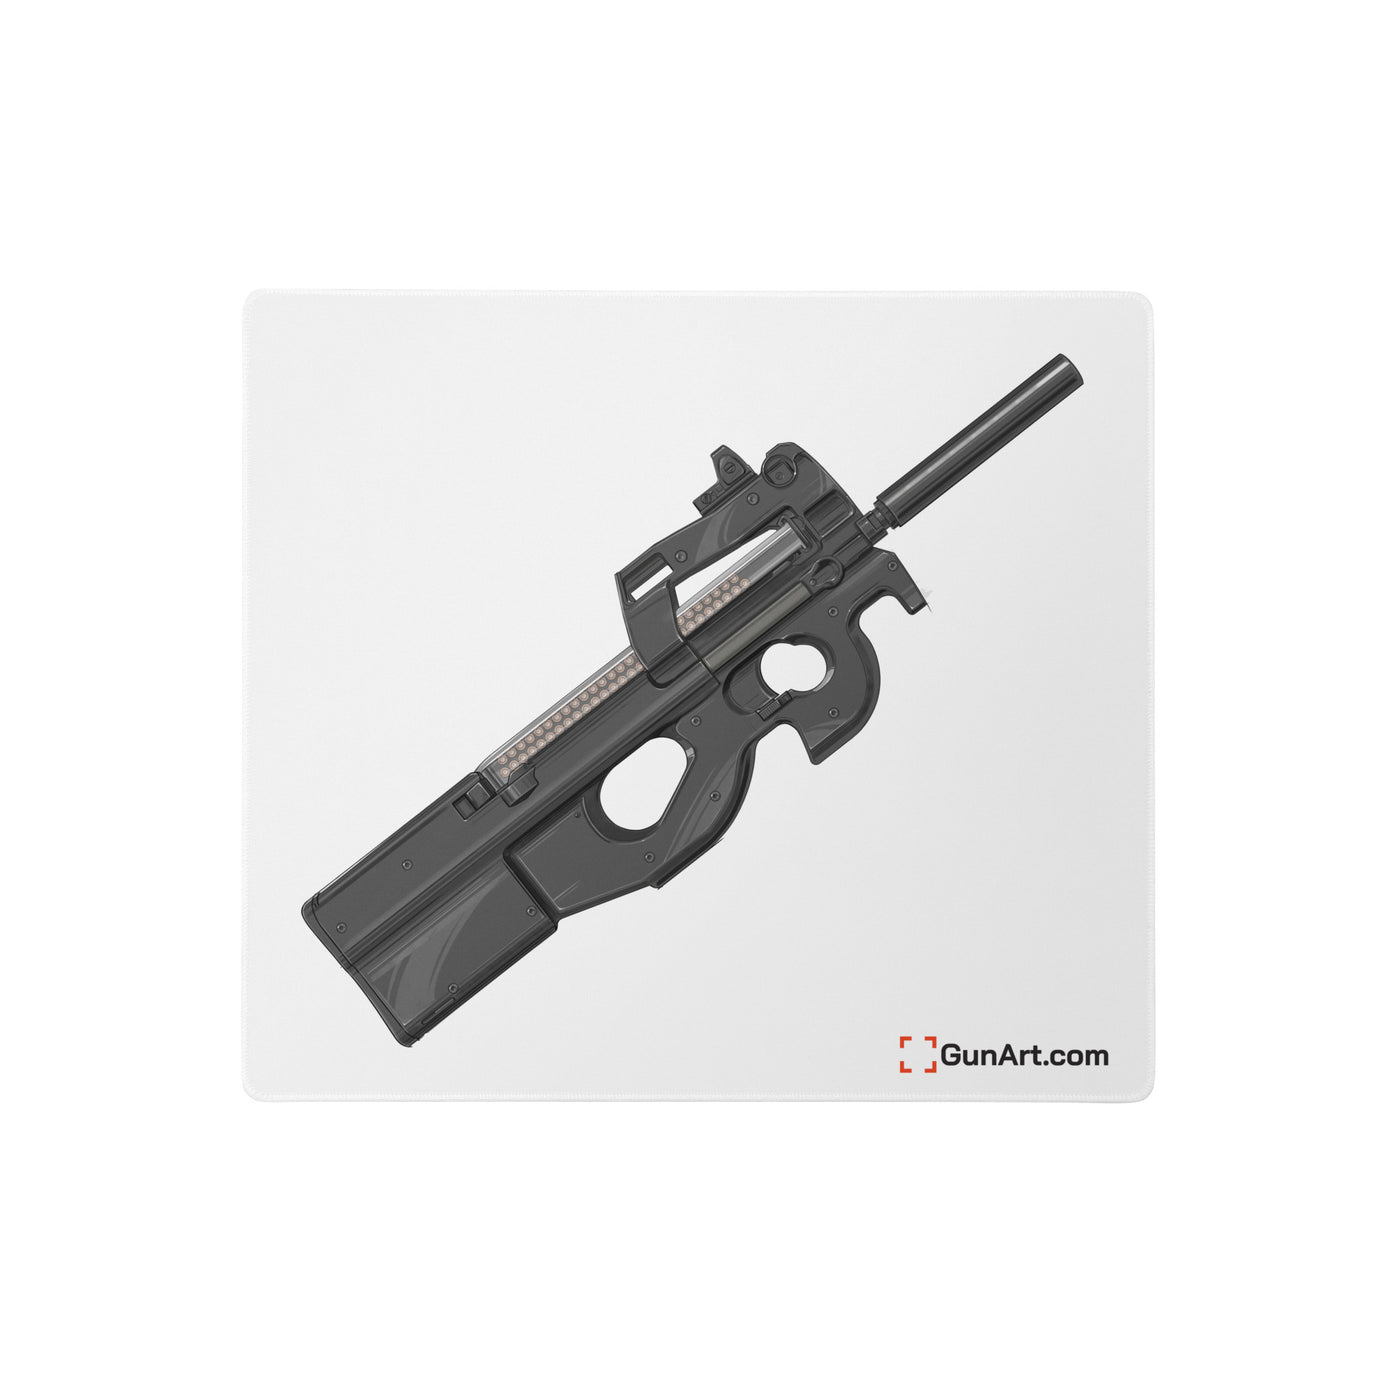 Secret Service Bullpup 5.7x28mm Subgun Gaming Mouse Pad - Just The Piece - White Background